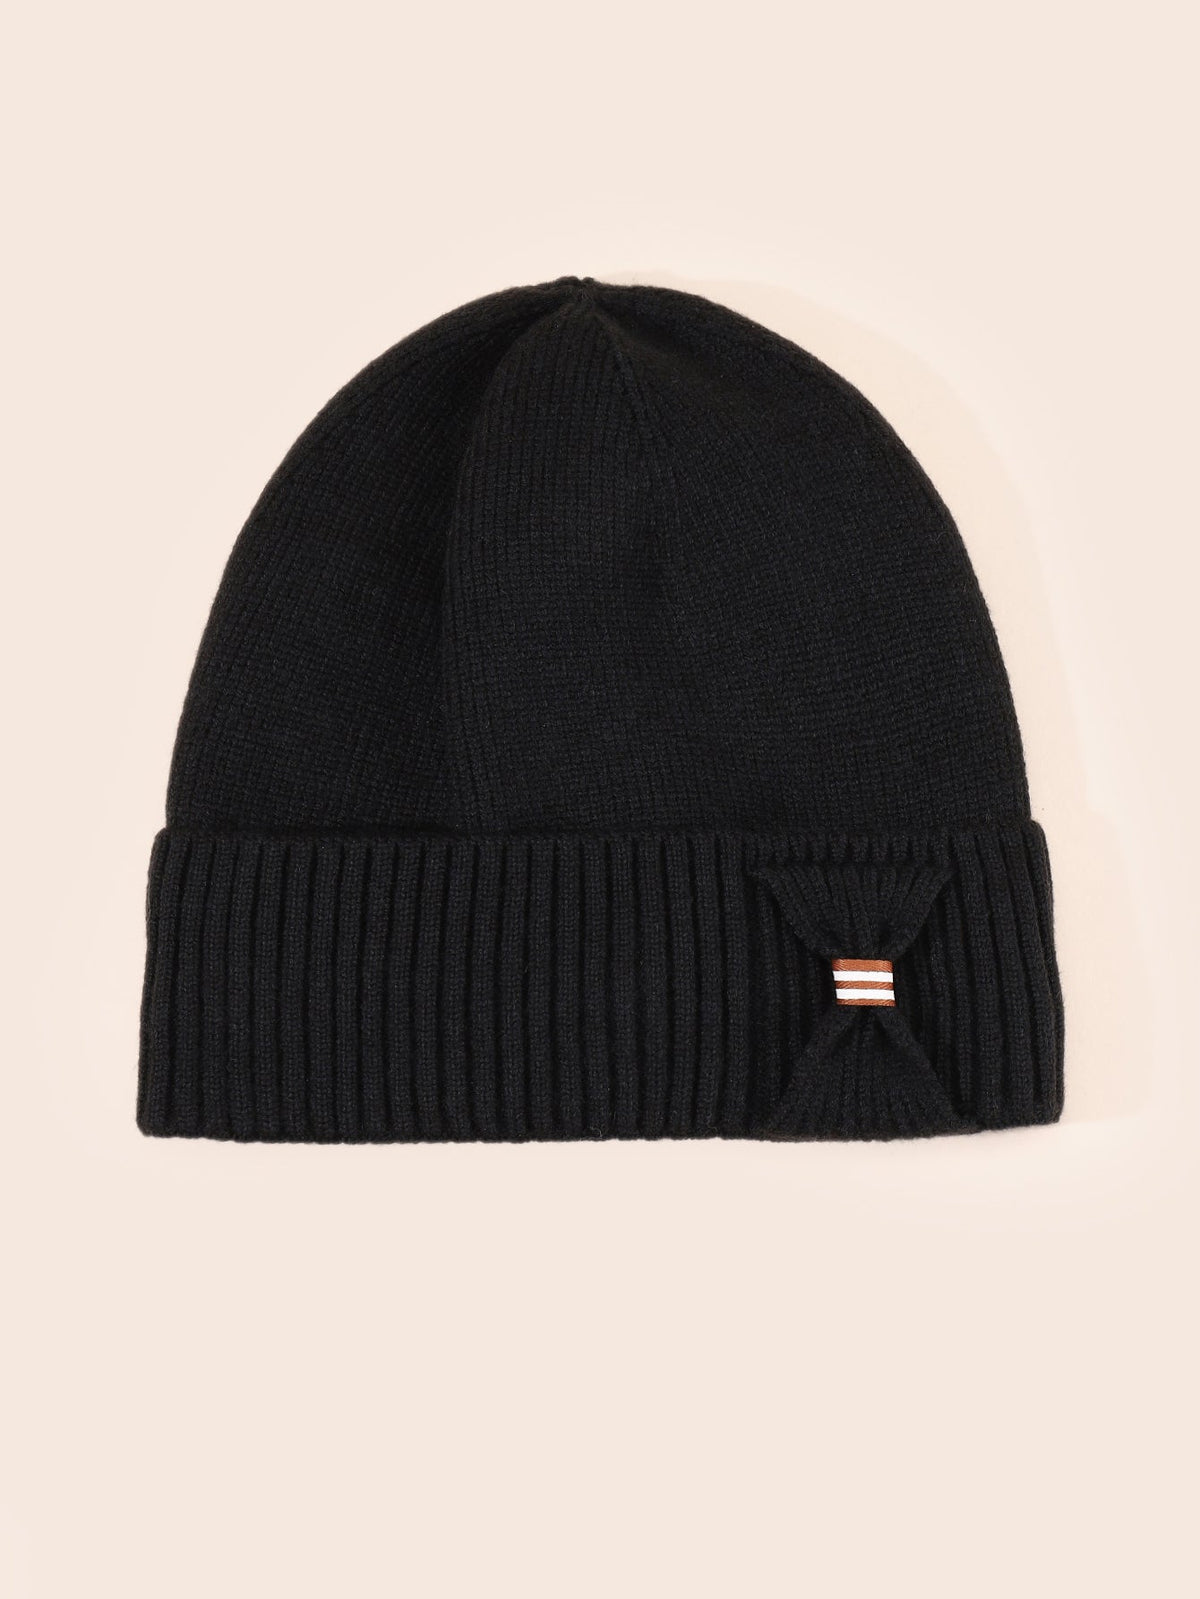 Solid Color Winter Warm Knitted Cap Sai Feel